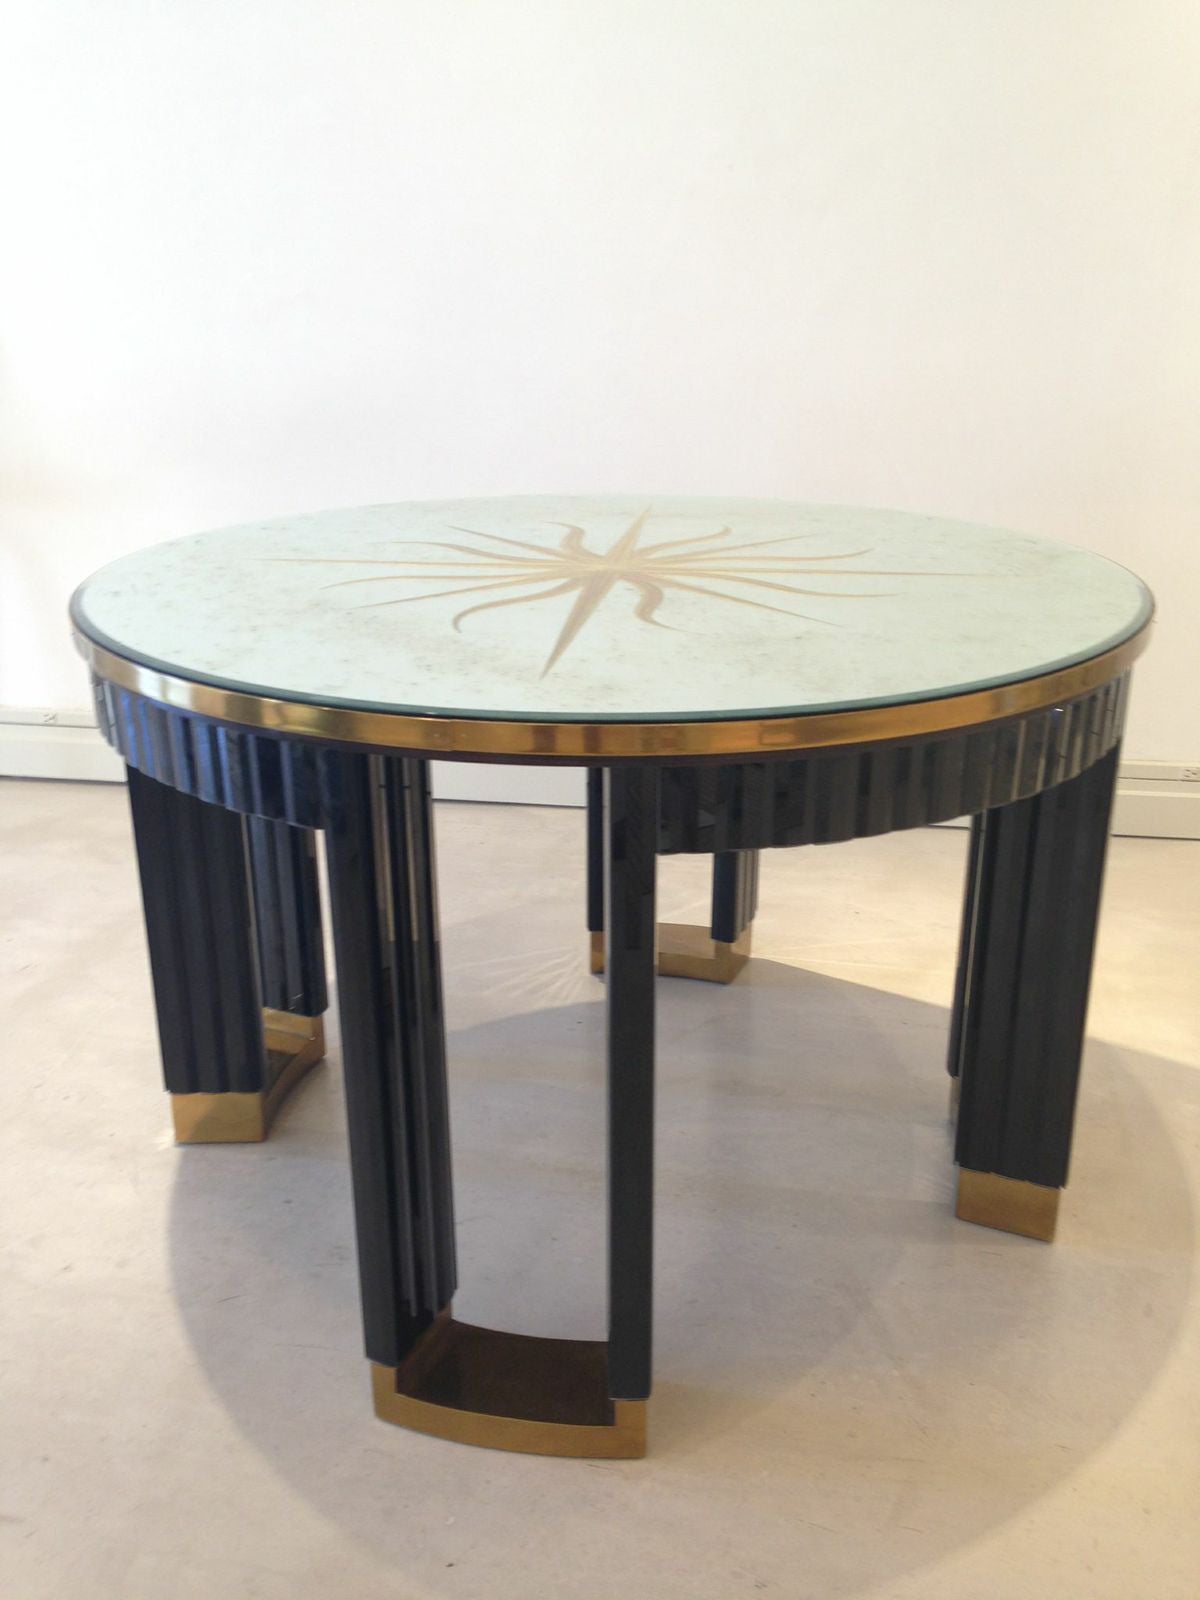 This Art Deco style table once stood on the floor of the Peter Marino designed VBH shop on Madison Avenue.